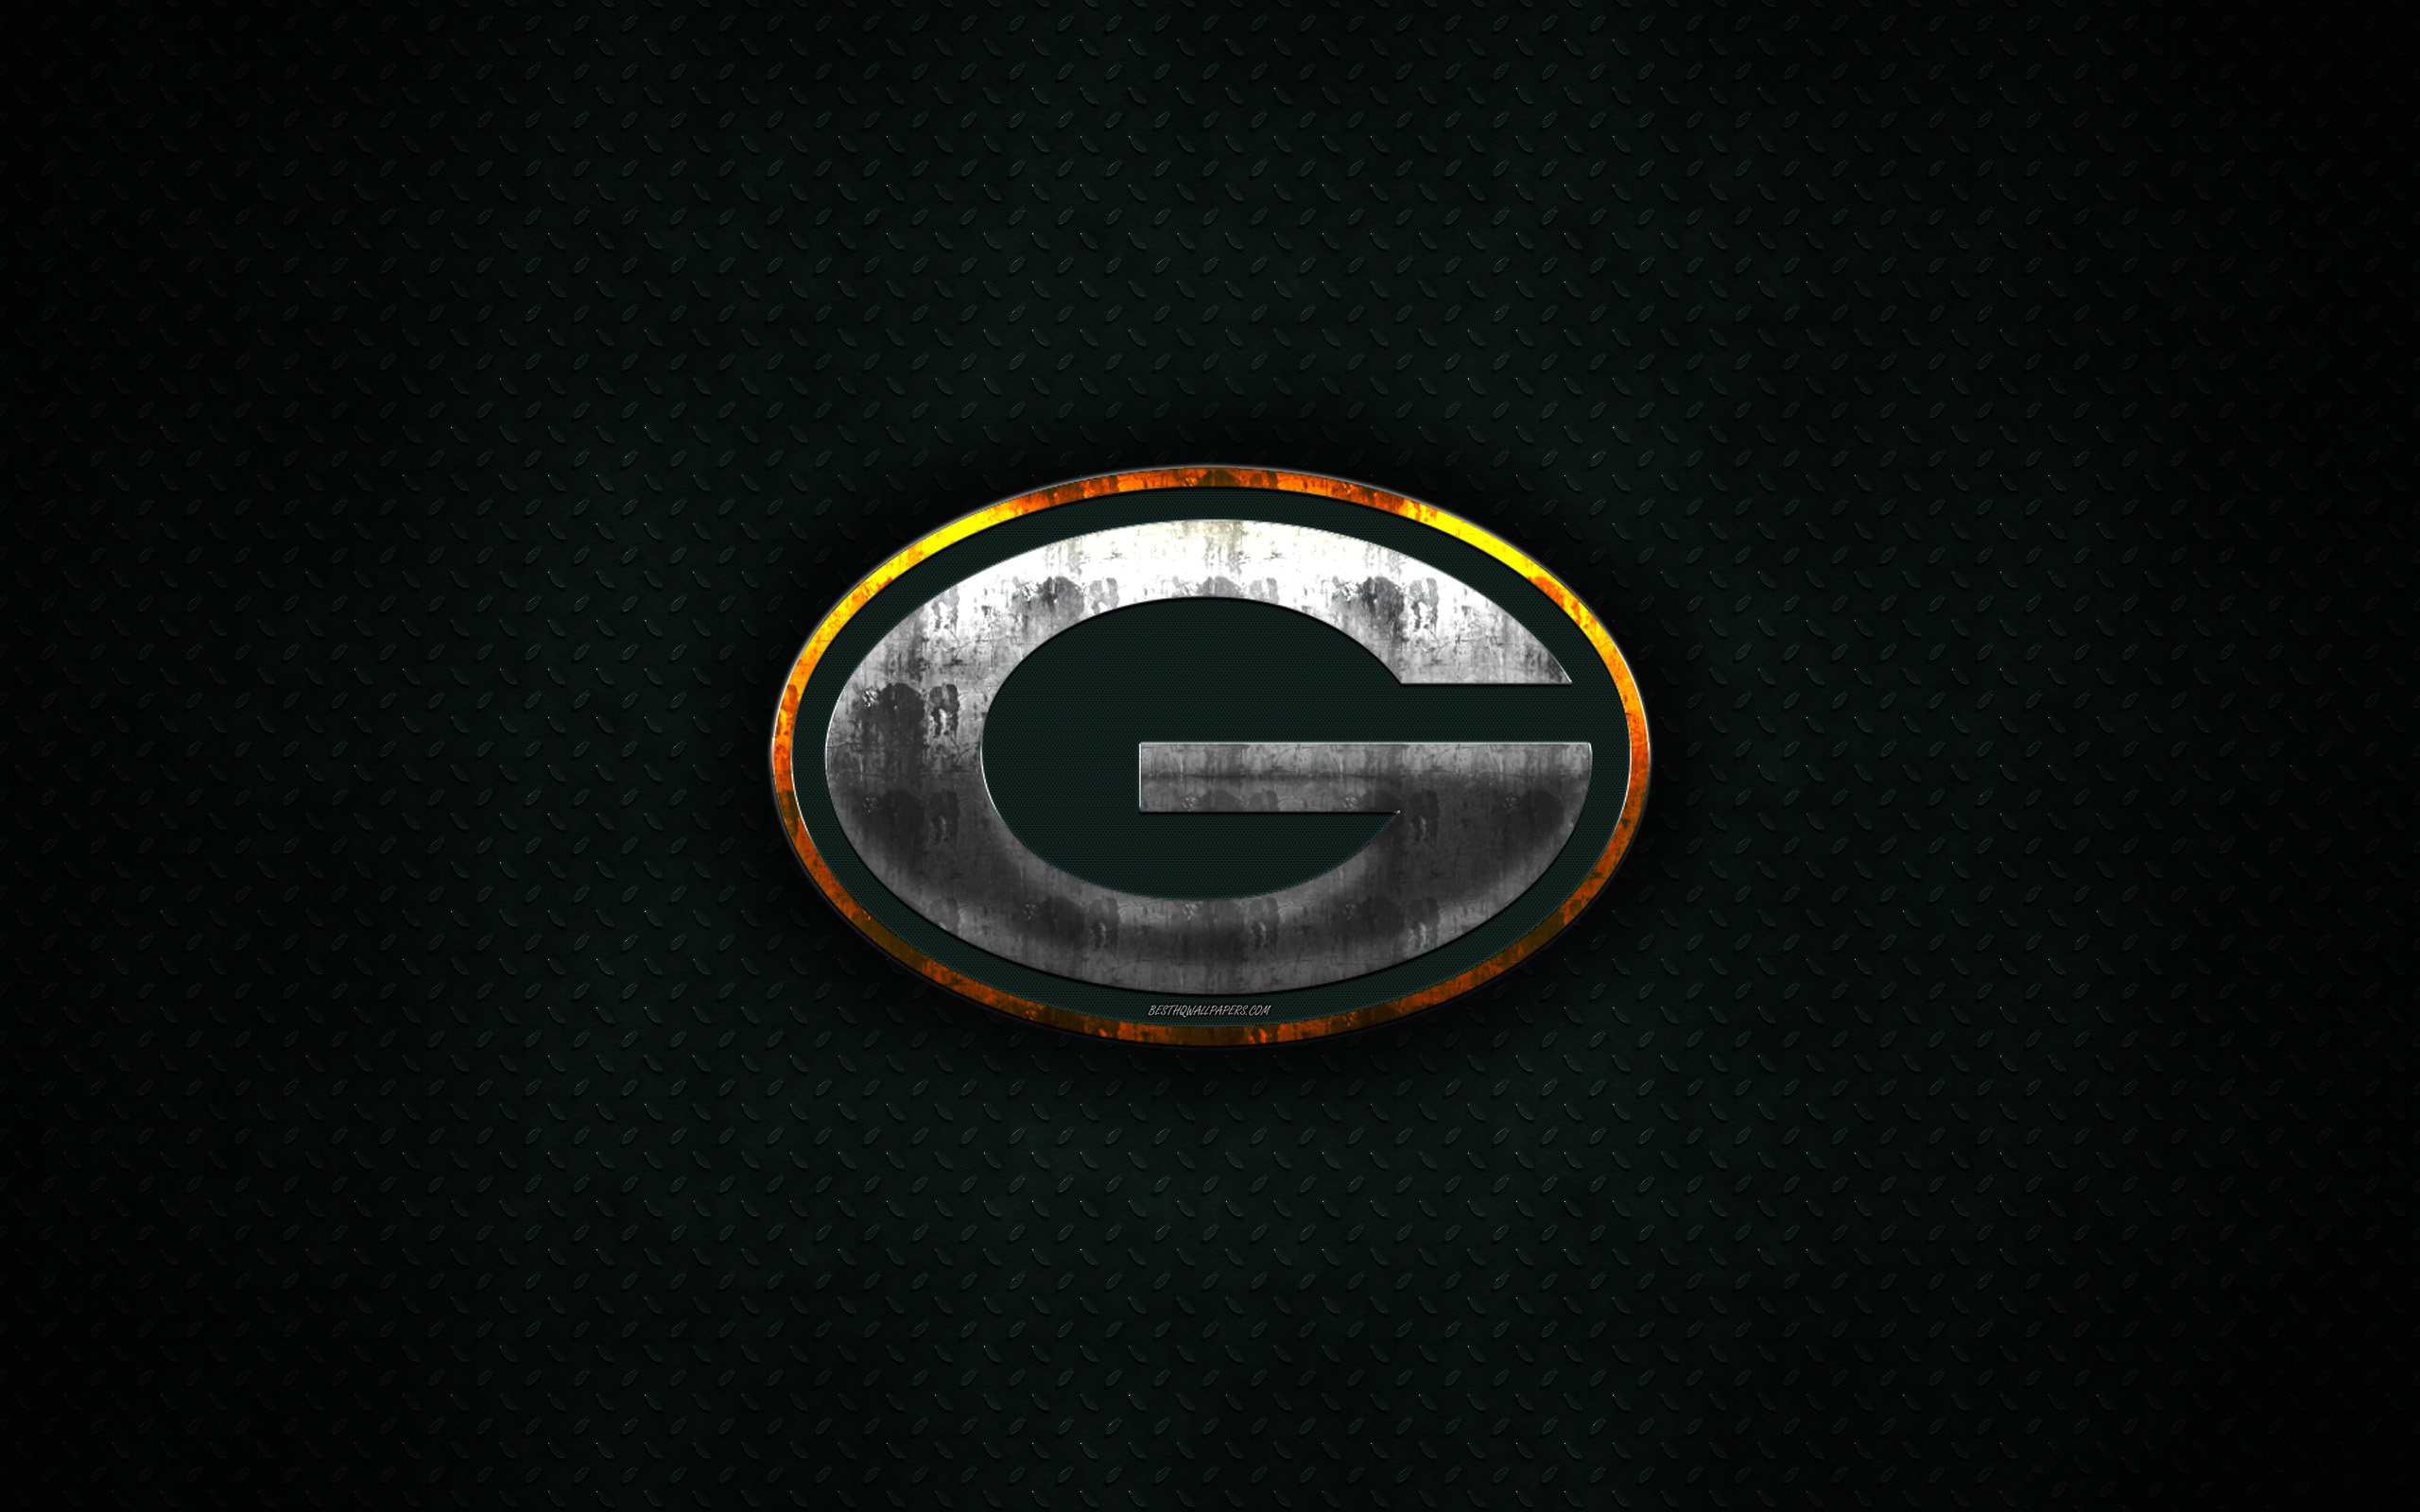 Green Bay Packers: Joined the American Professional Football Association (APFA) in 1921. 2560x1600 HD Wallpaper.